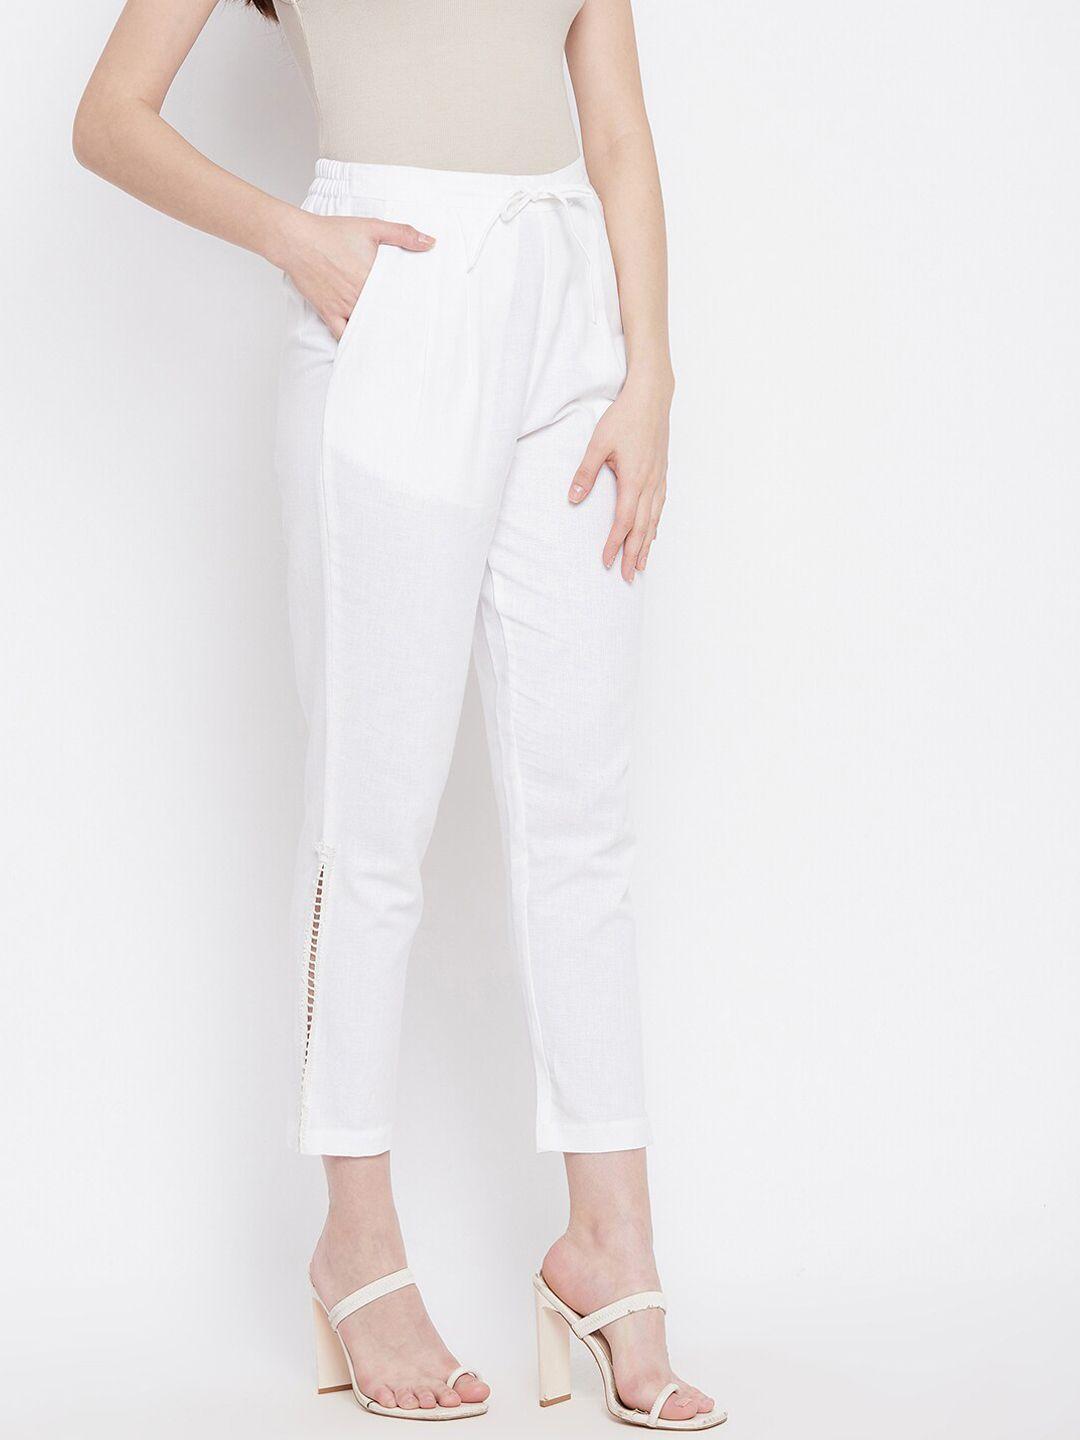 winered-women-white-solid-cotton-trousers